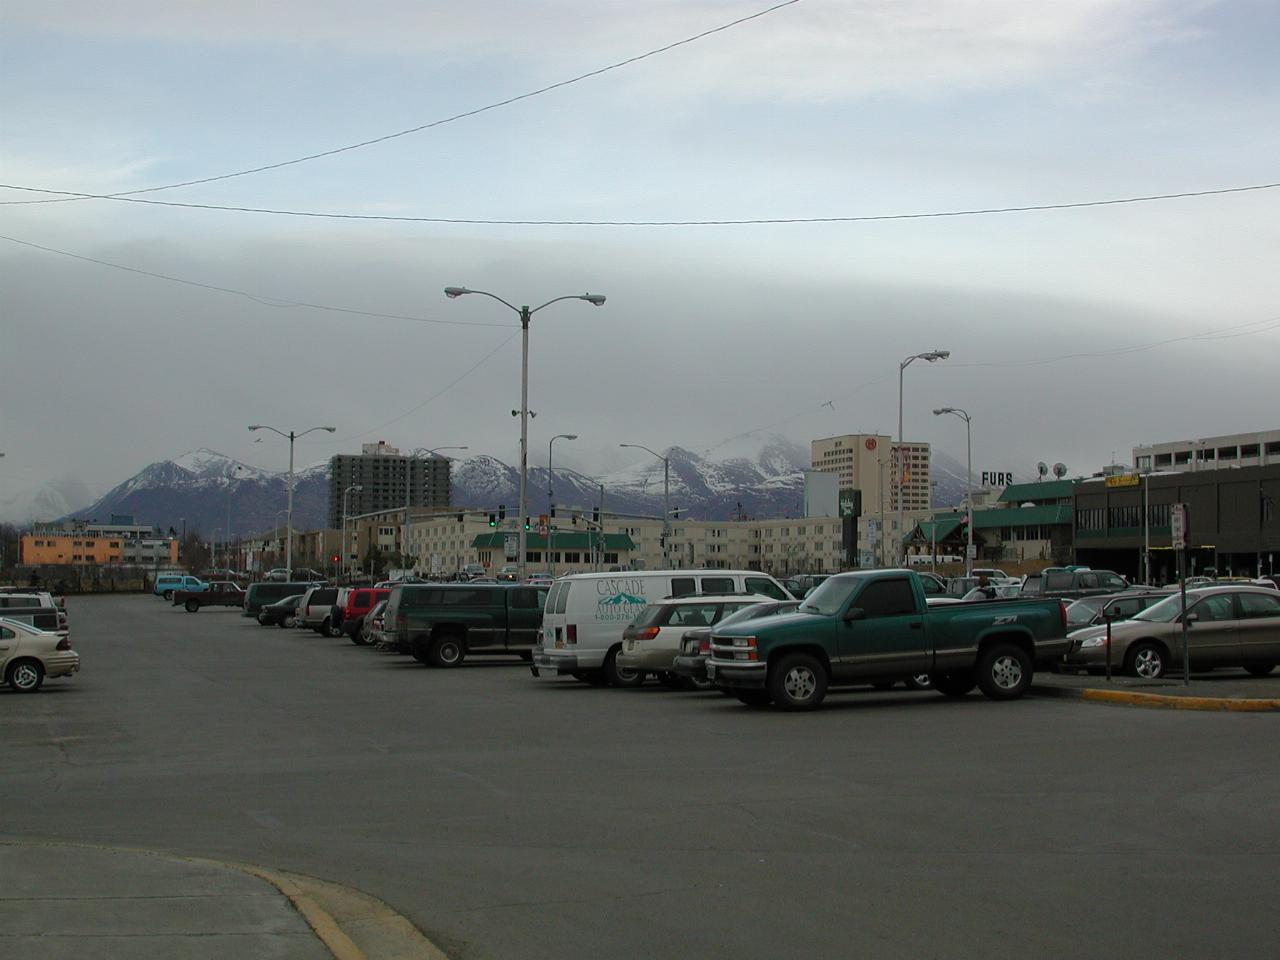 Looking east in Anchorage